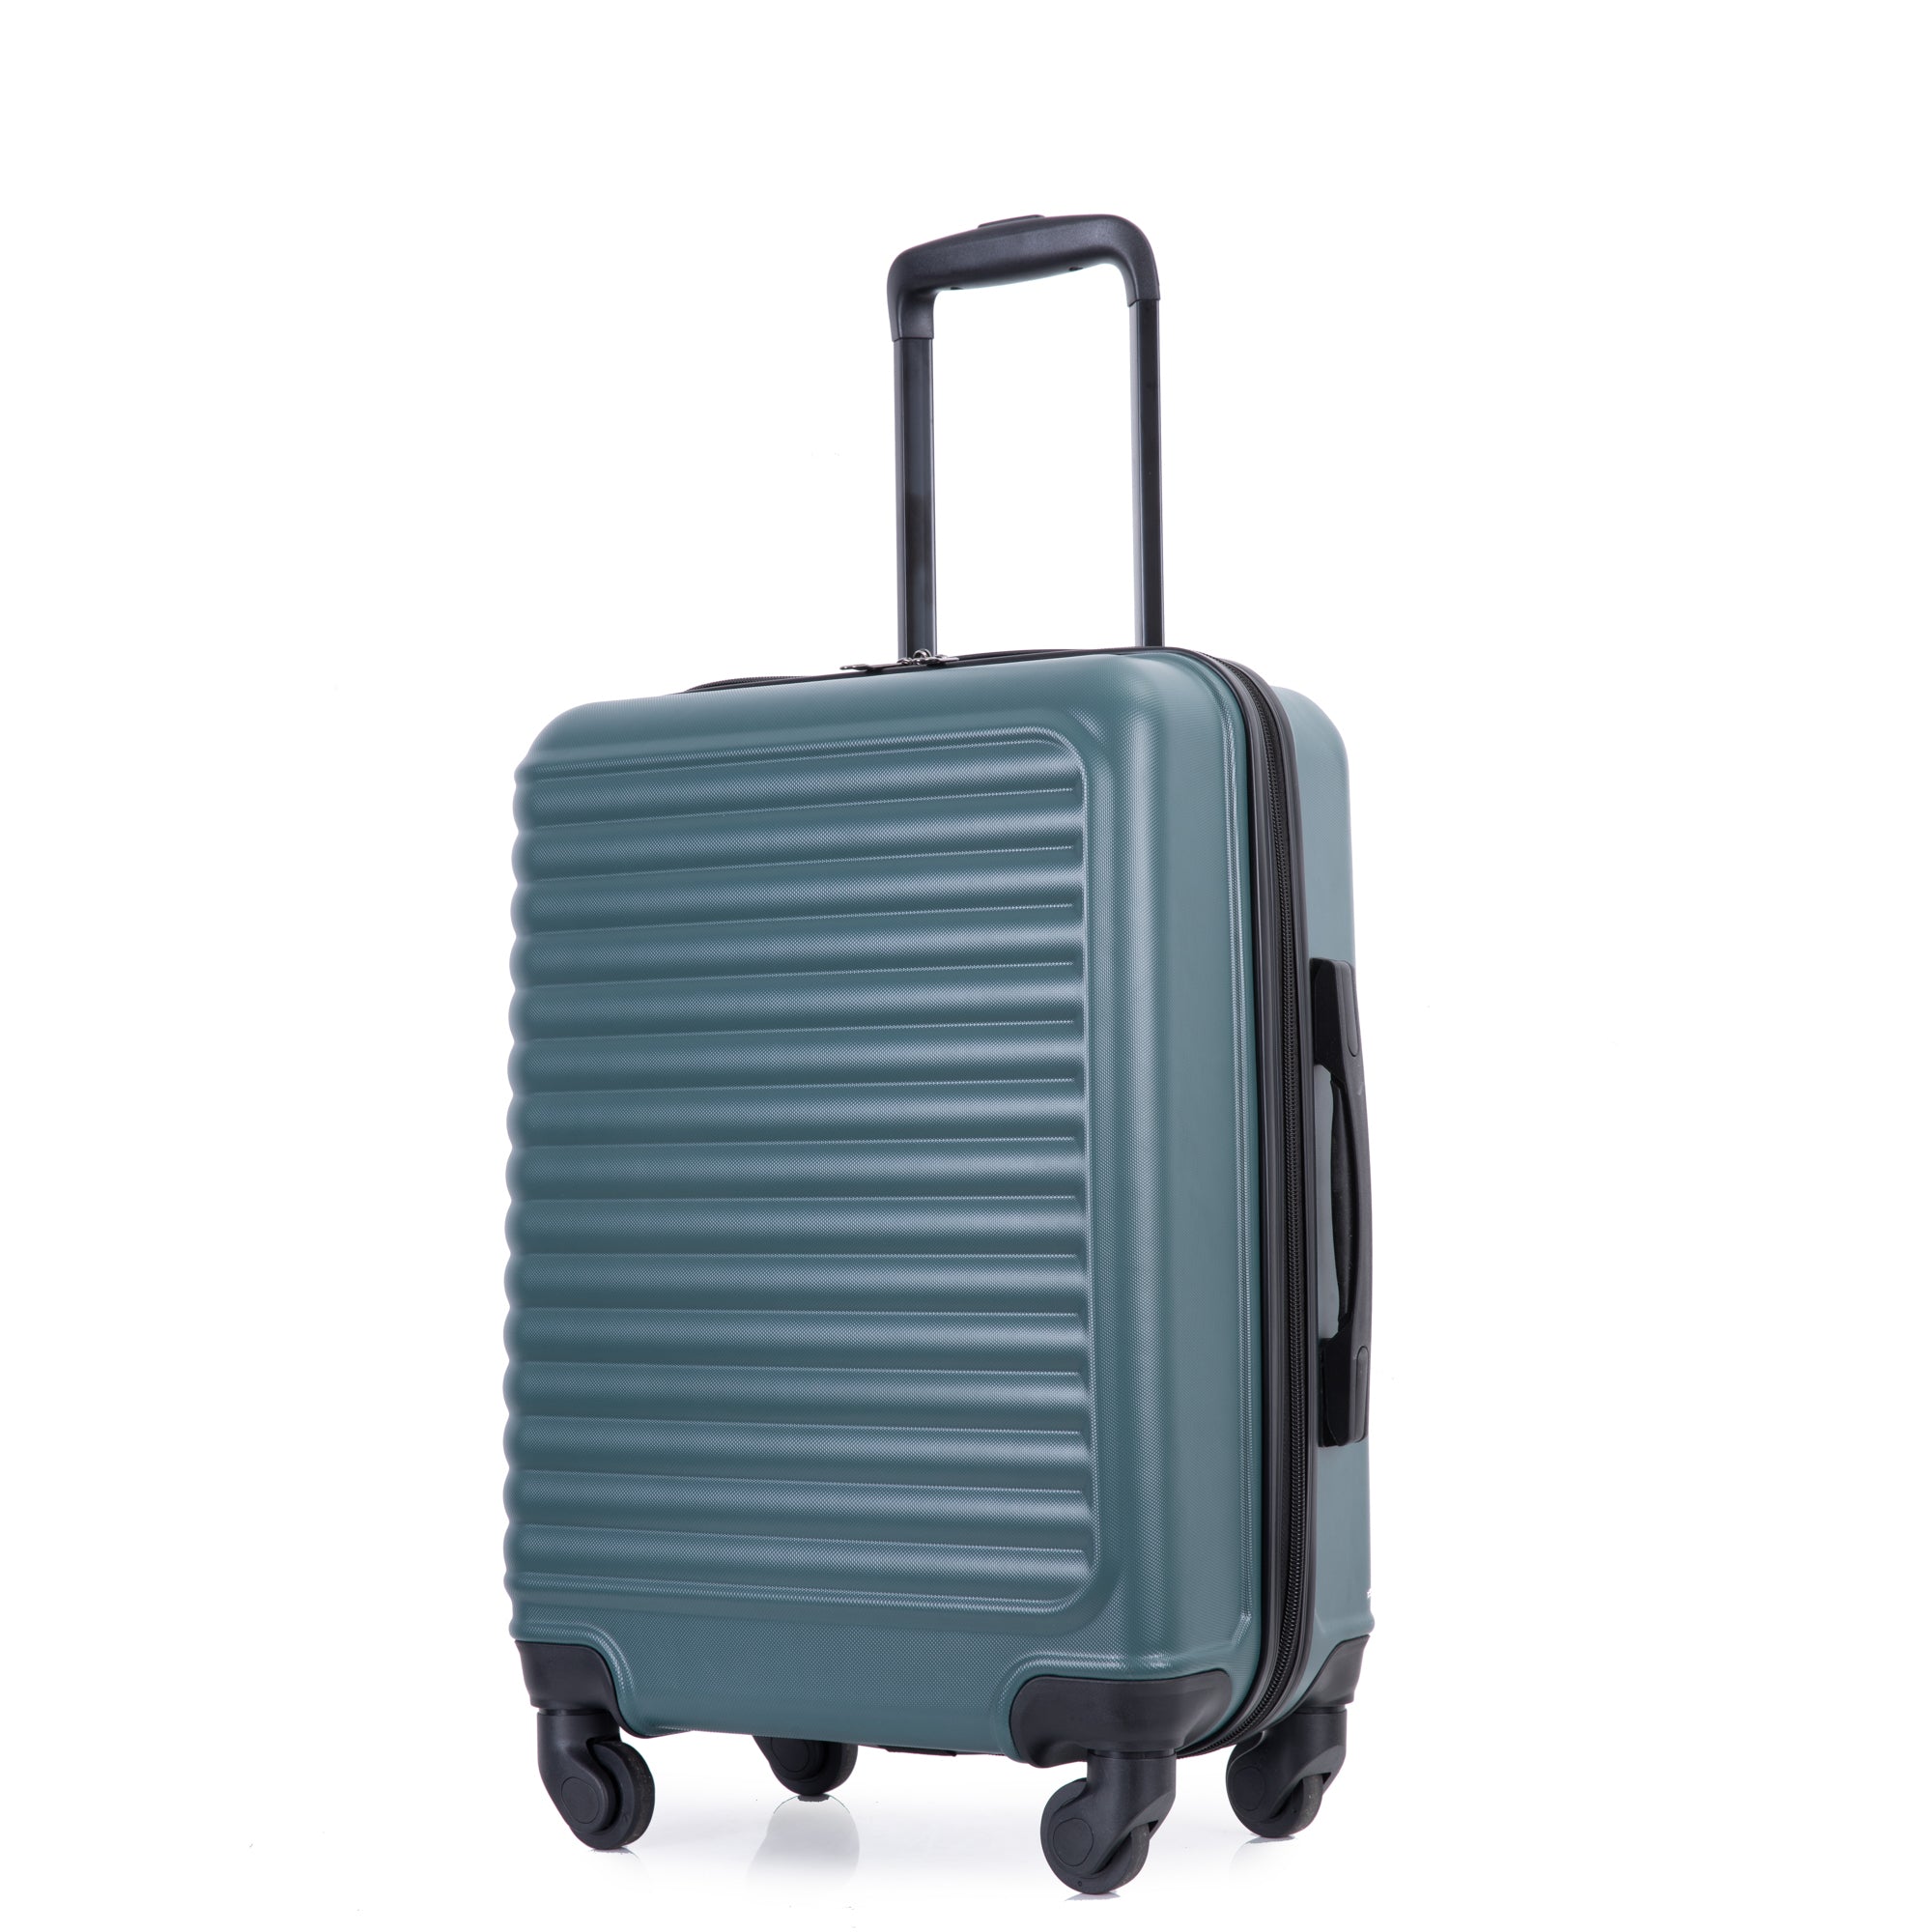 20" Carry on Luggage Lightweight Suitcase, Spinner green-abs